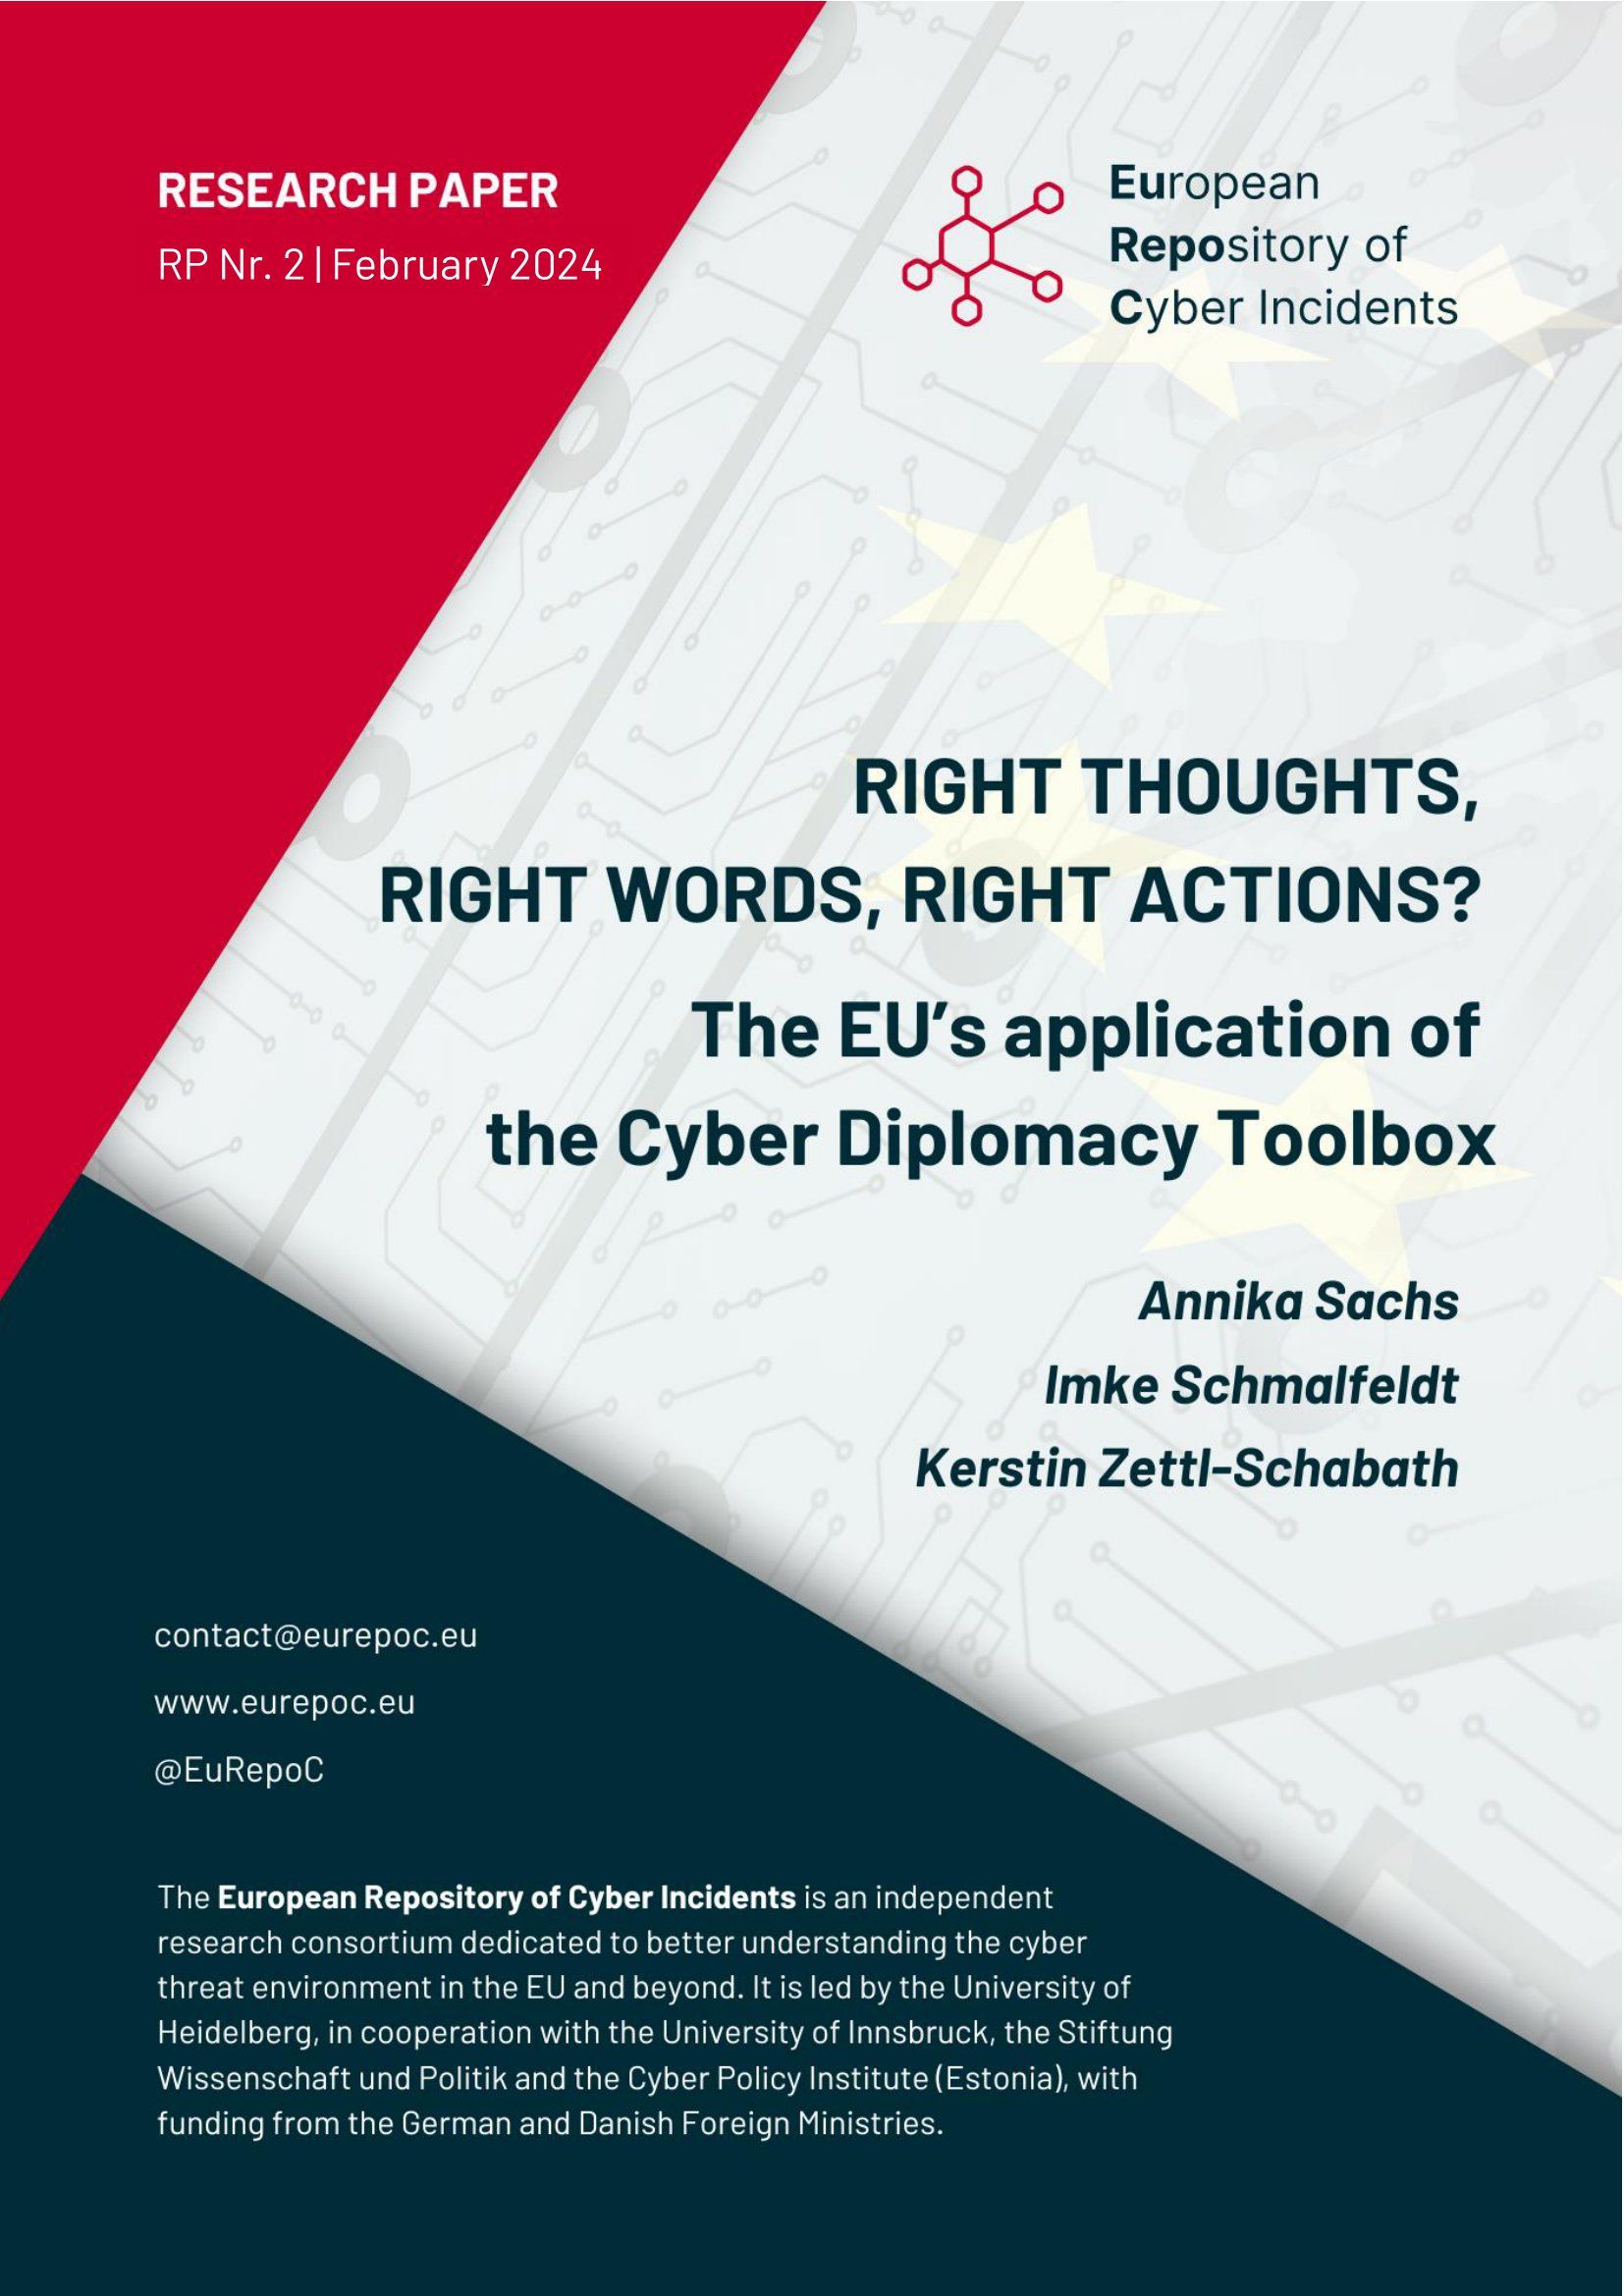 Right Thoughts, Right Words, Right Actions?: The EU's Application of the Cyber Diplomacy Toolbox